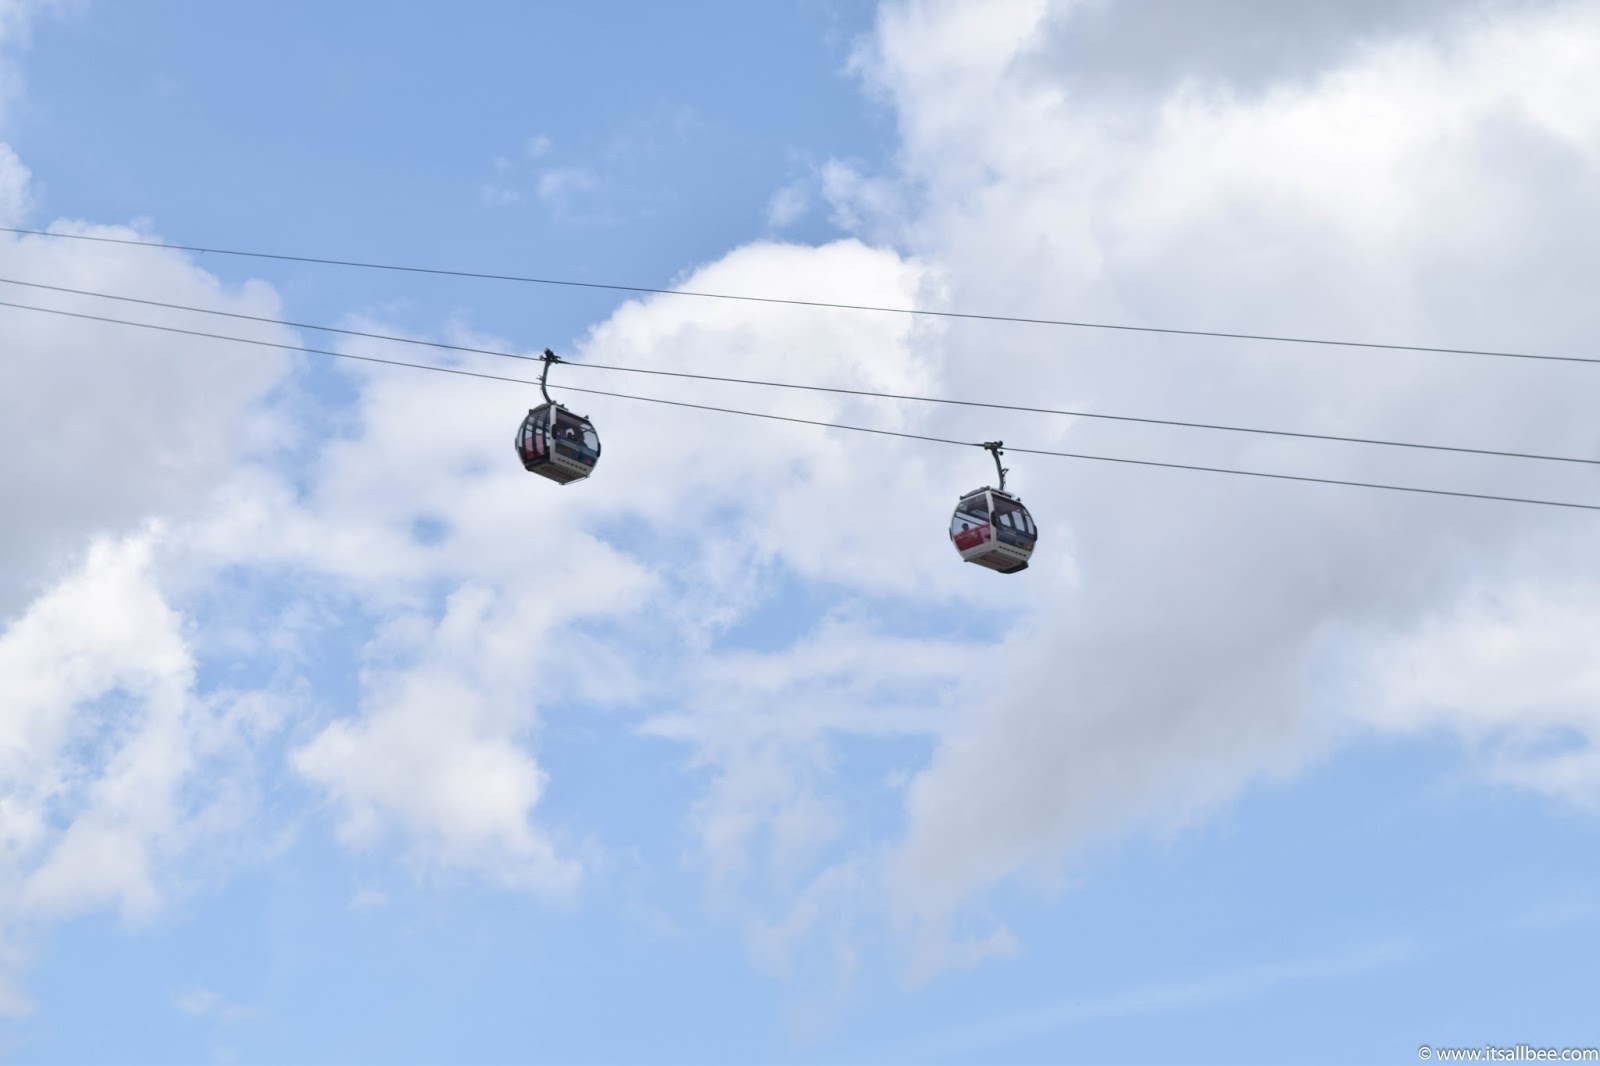 North Greenwich emirates cable cars